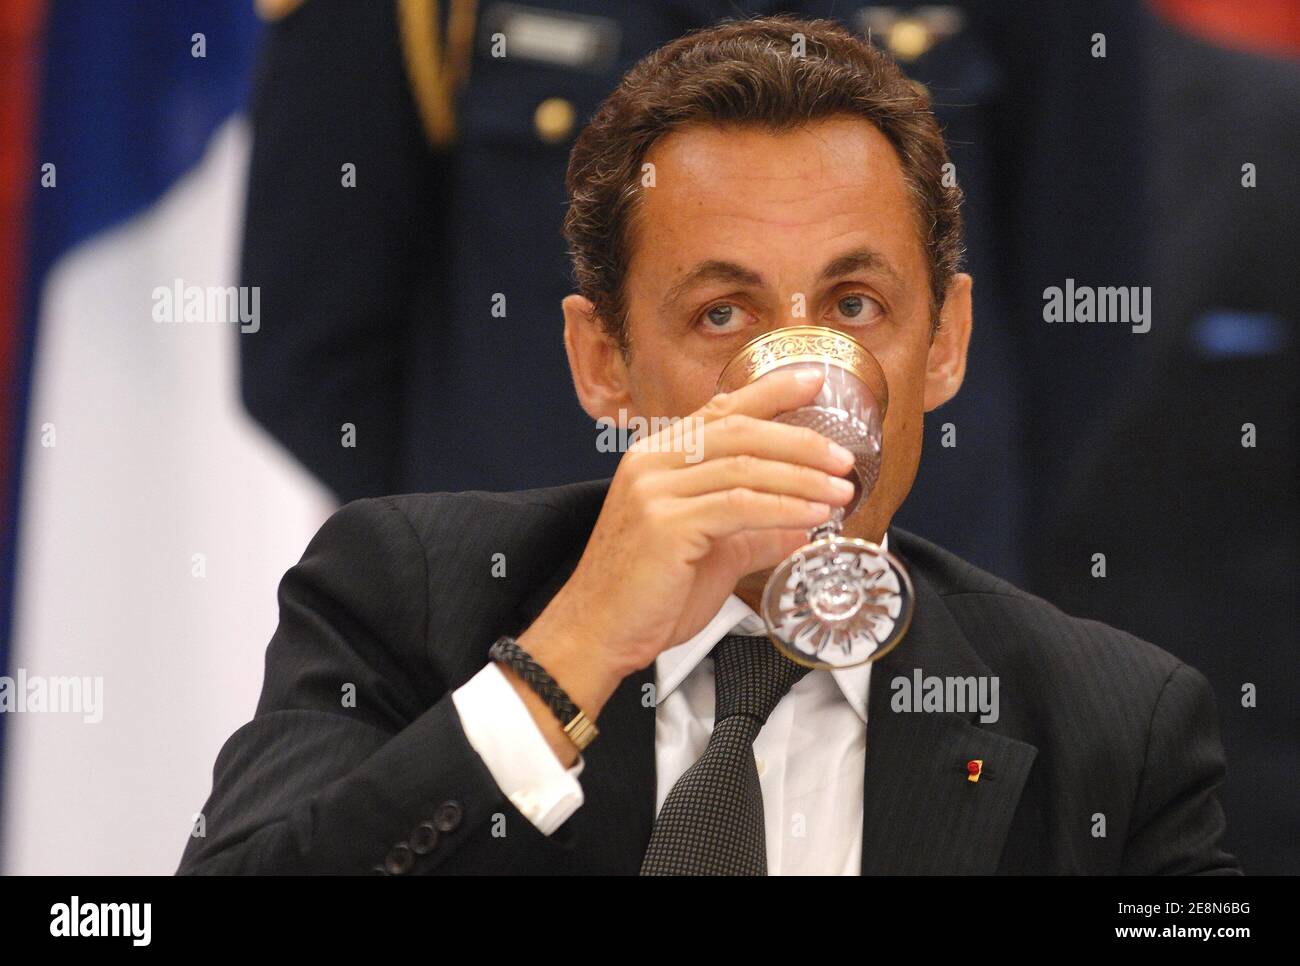 French President Nicolas Sarkozy attends the official dinner hosted President of Gabon Omar Bongo Ondimba at the 'Palais de la Presidence' in Libreville, Gabon, on July 27, 2007. Photo by Christophe